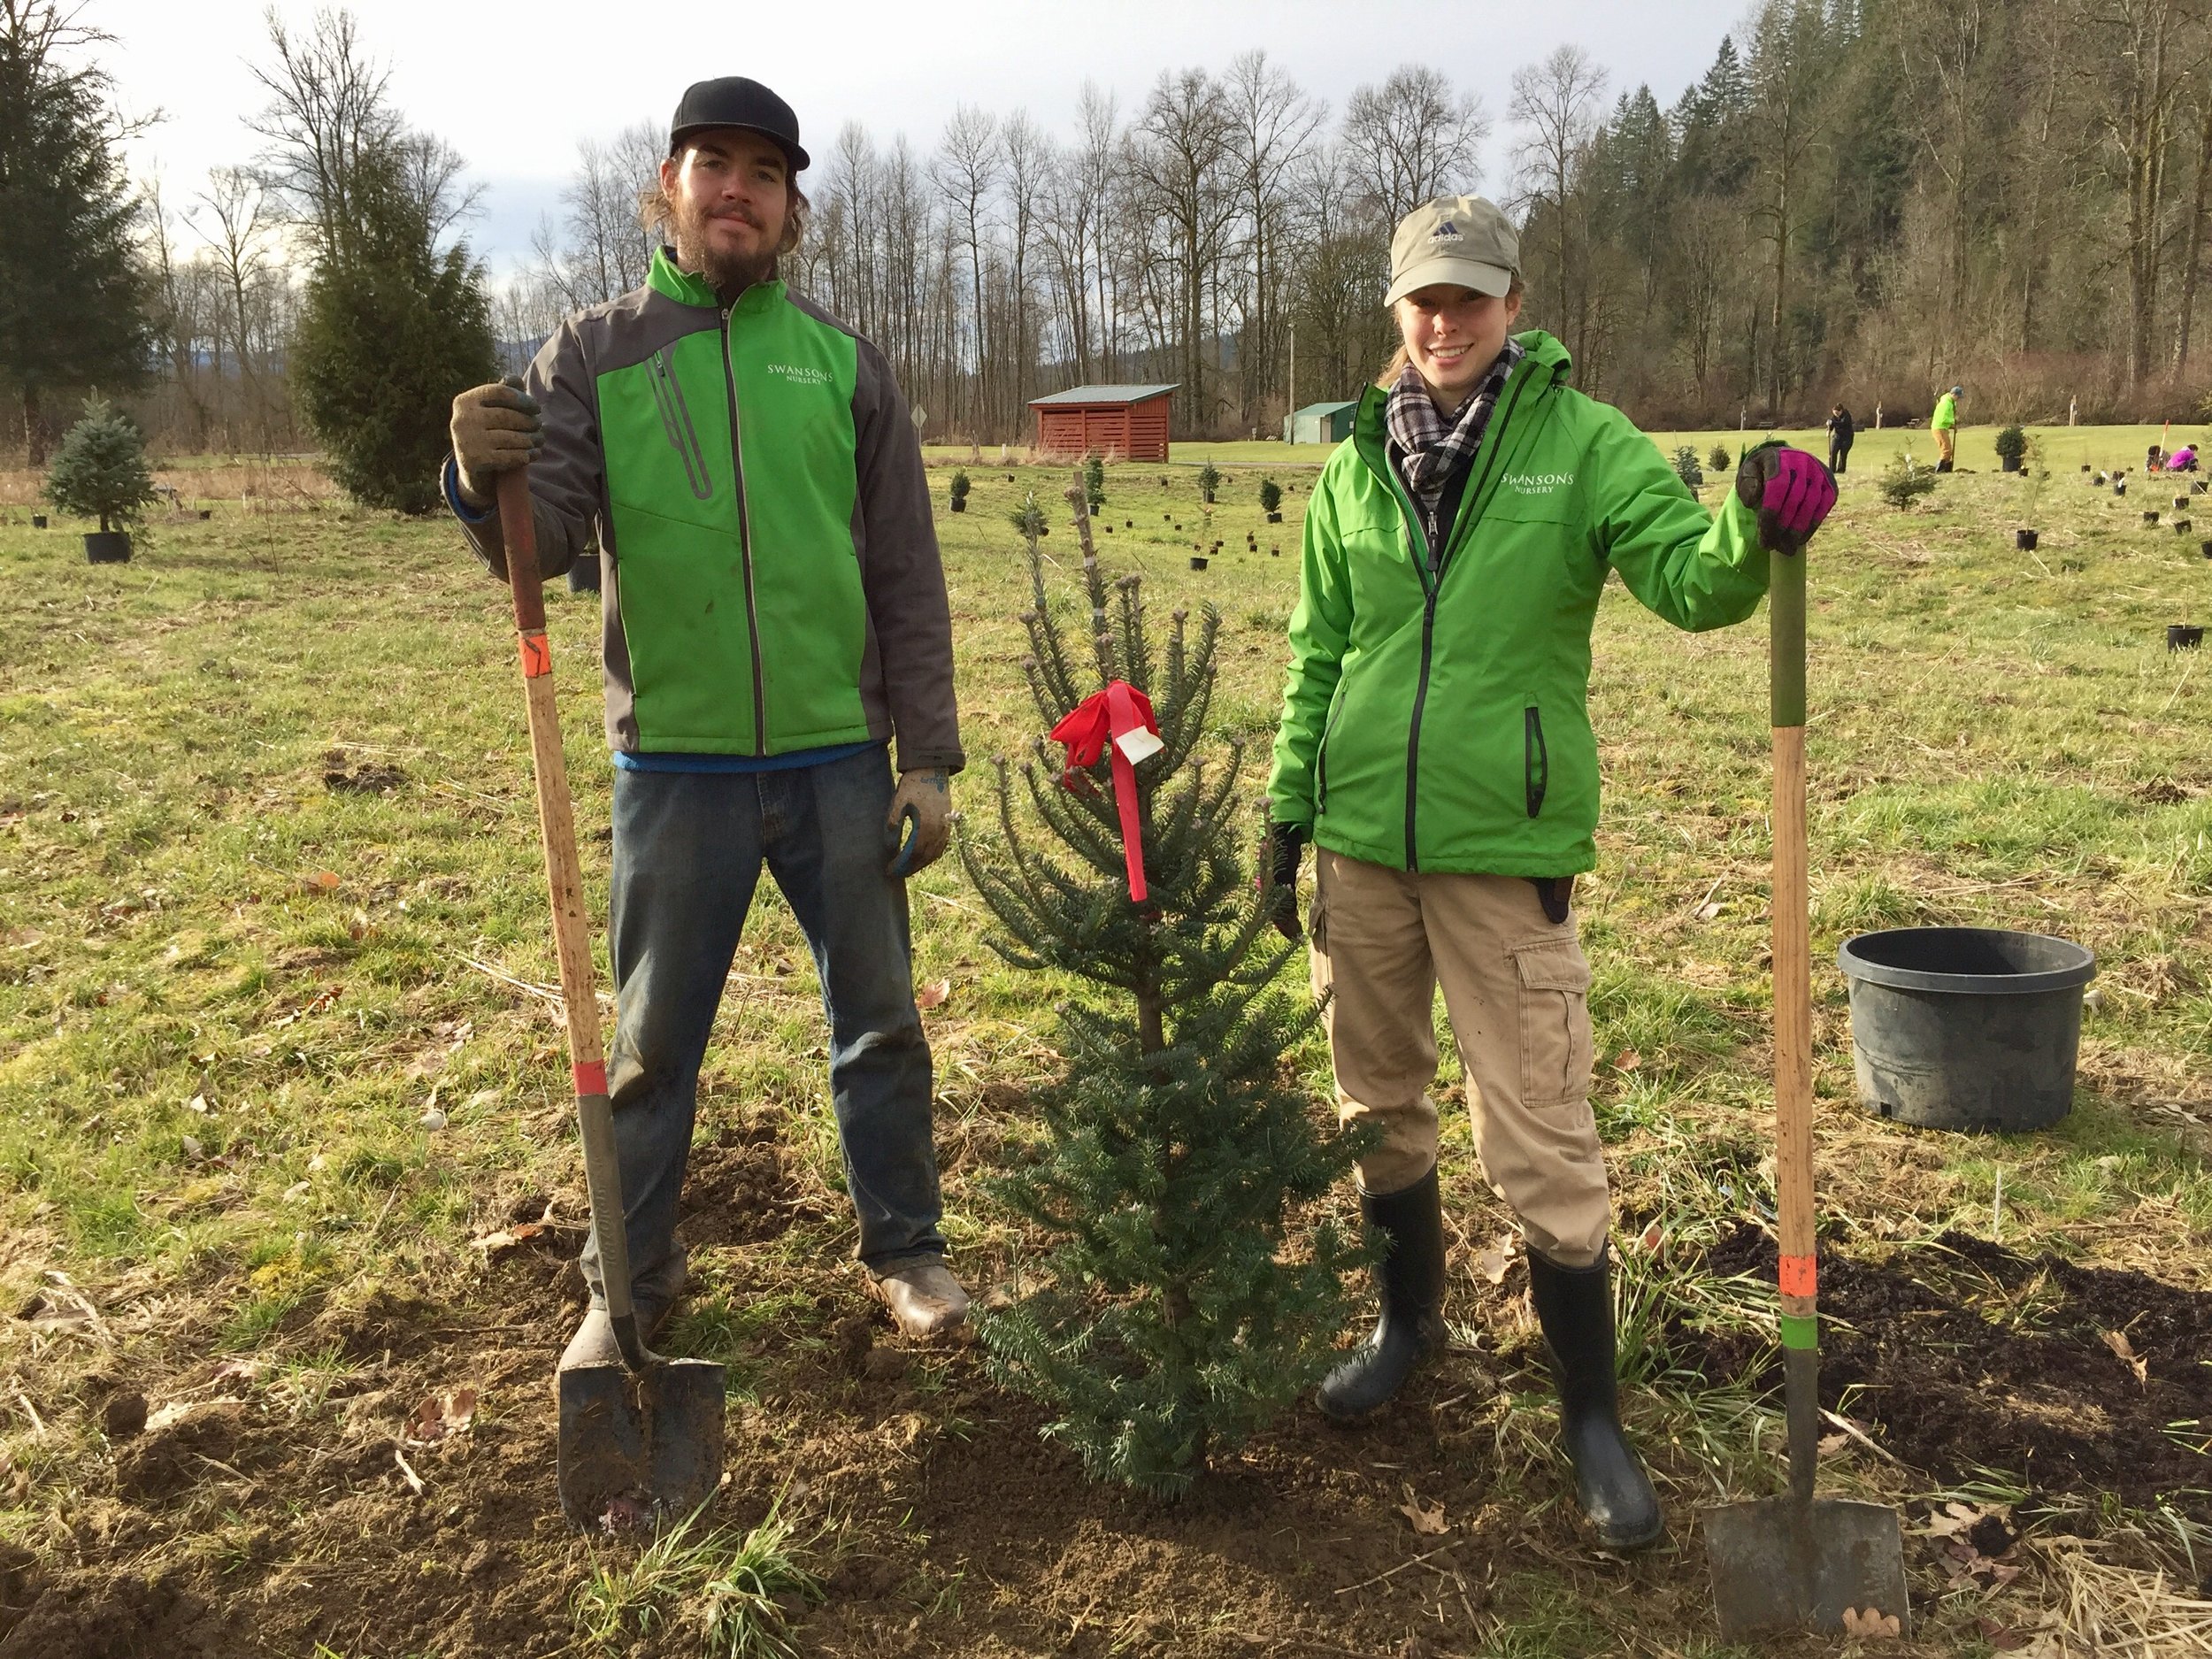 Planting trees with King County Parks